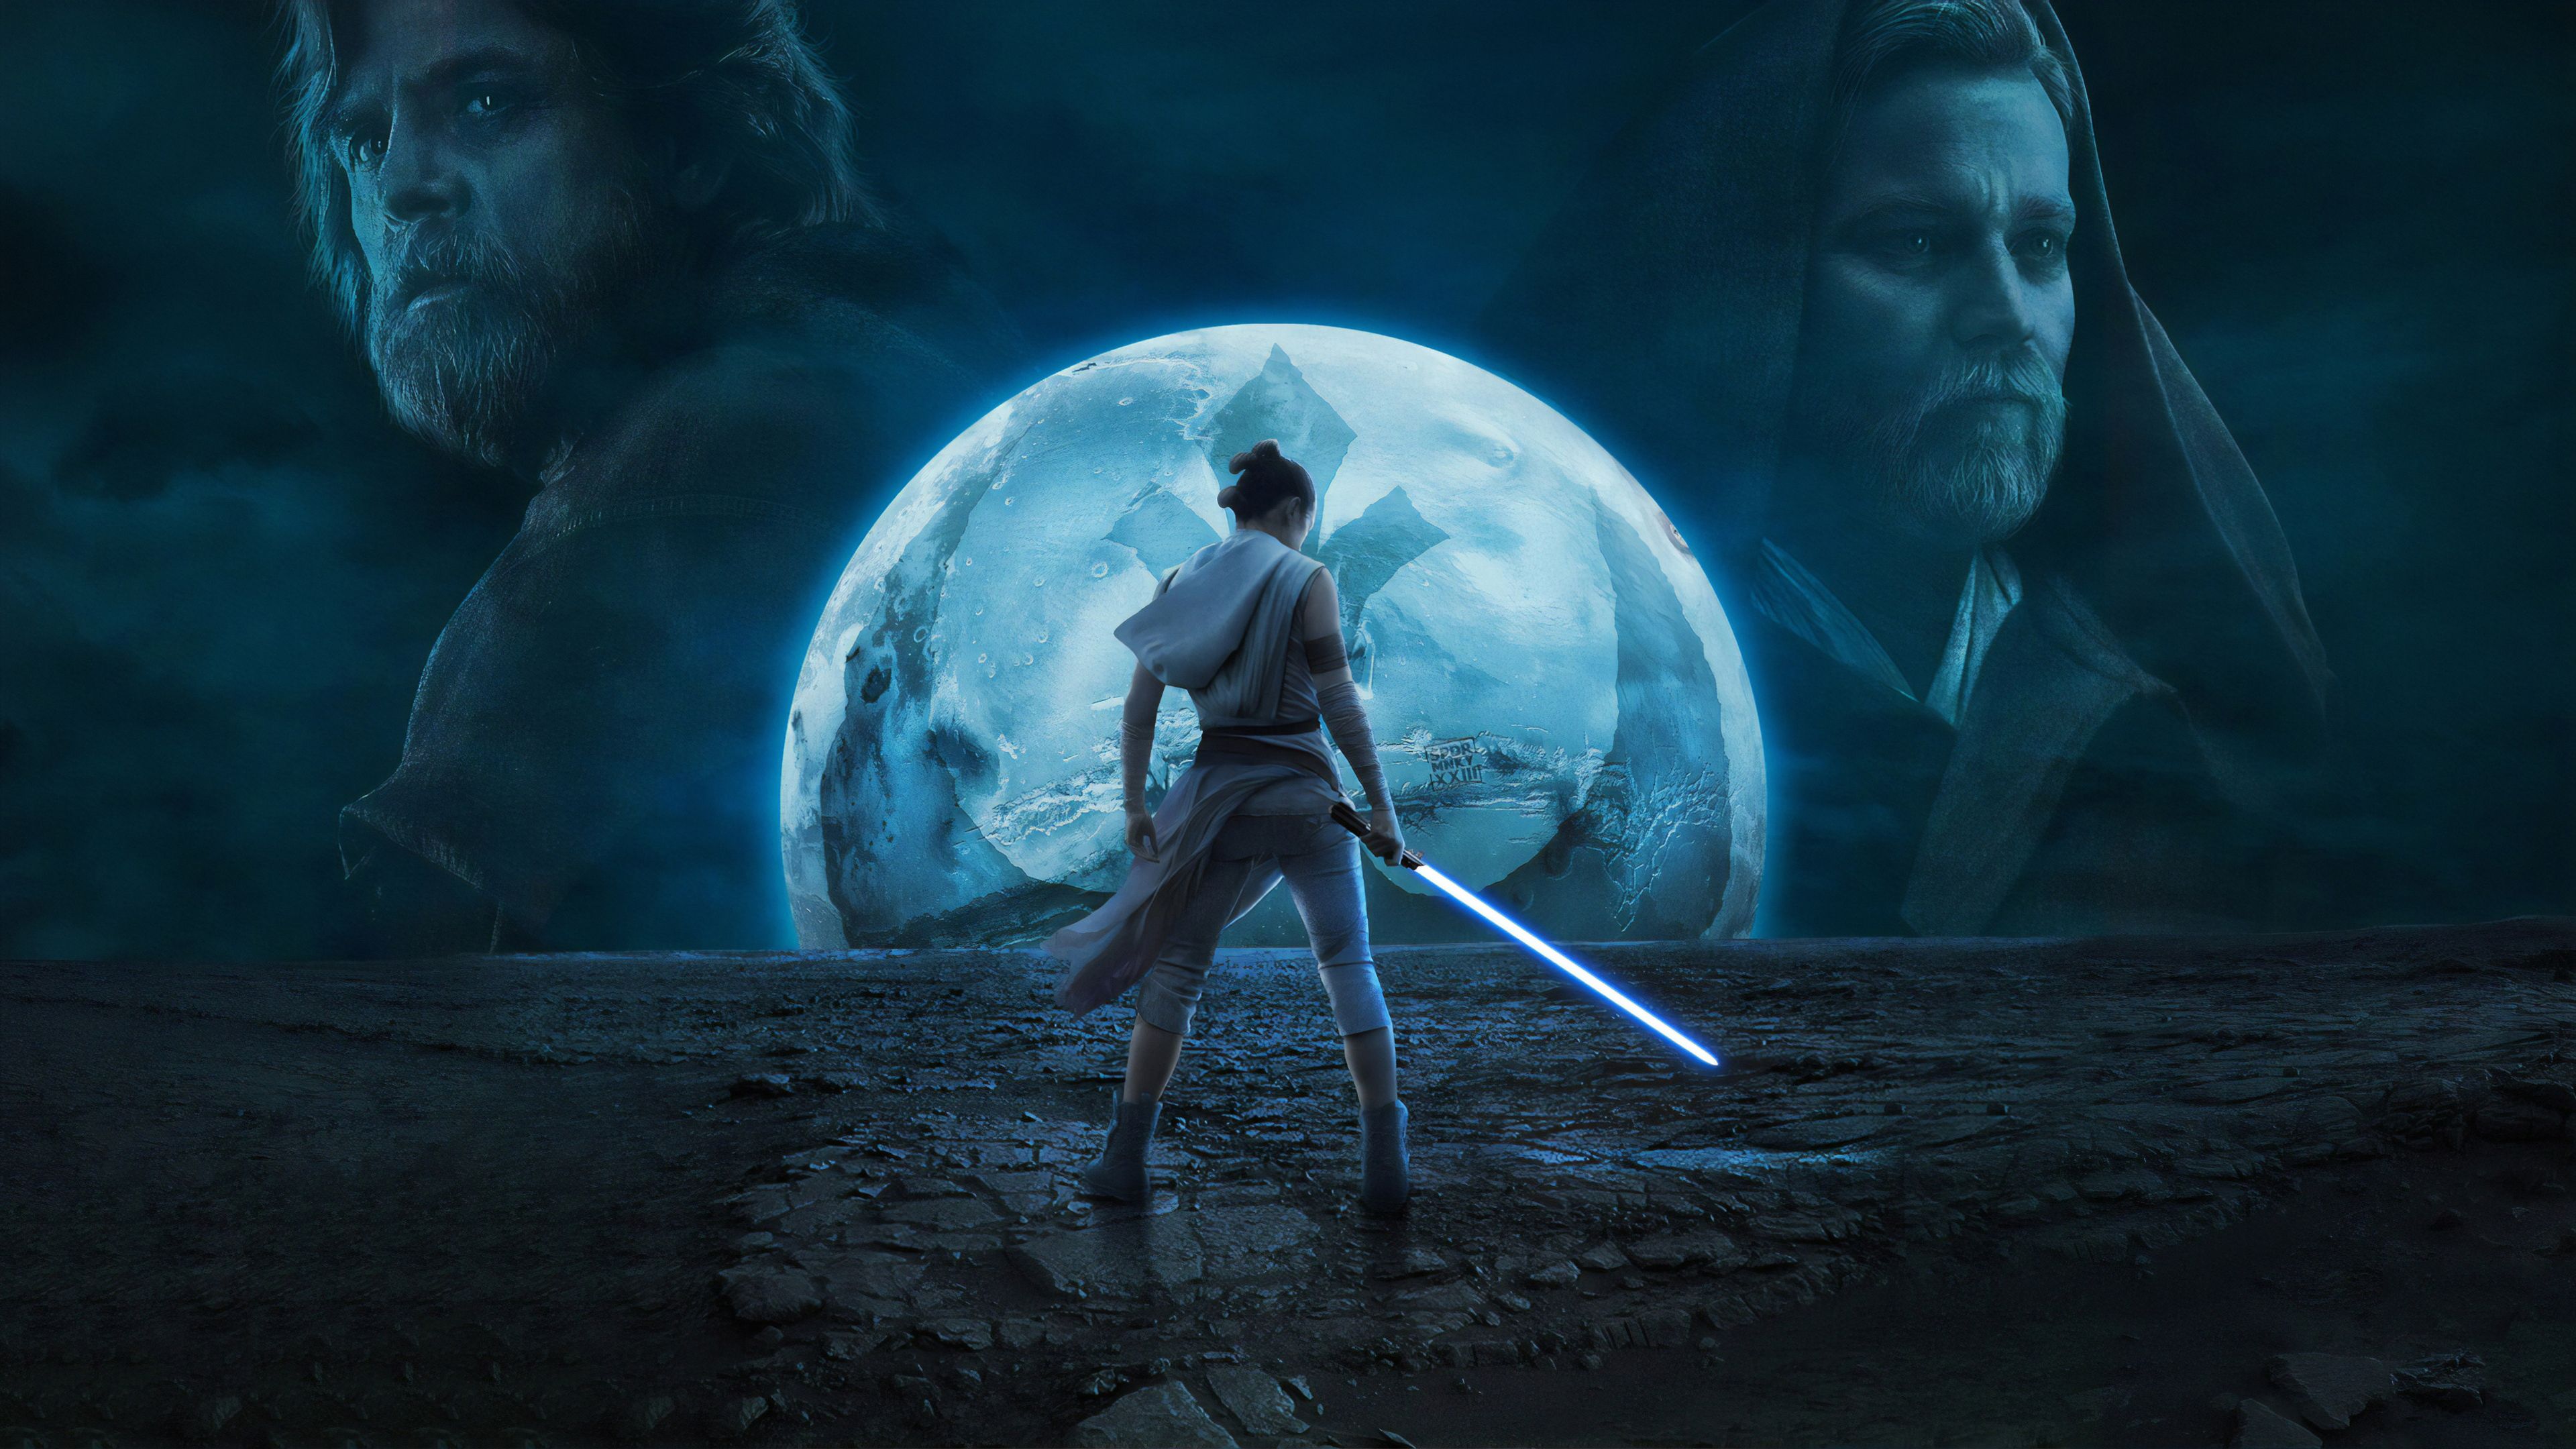 Wallpaper 4k Star Wars The Rise Of Skywalker New 2019 movies